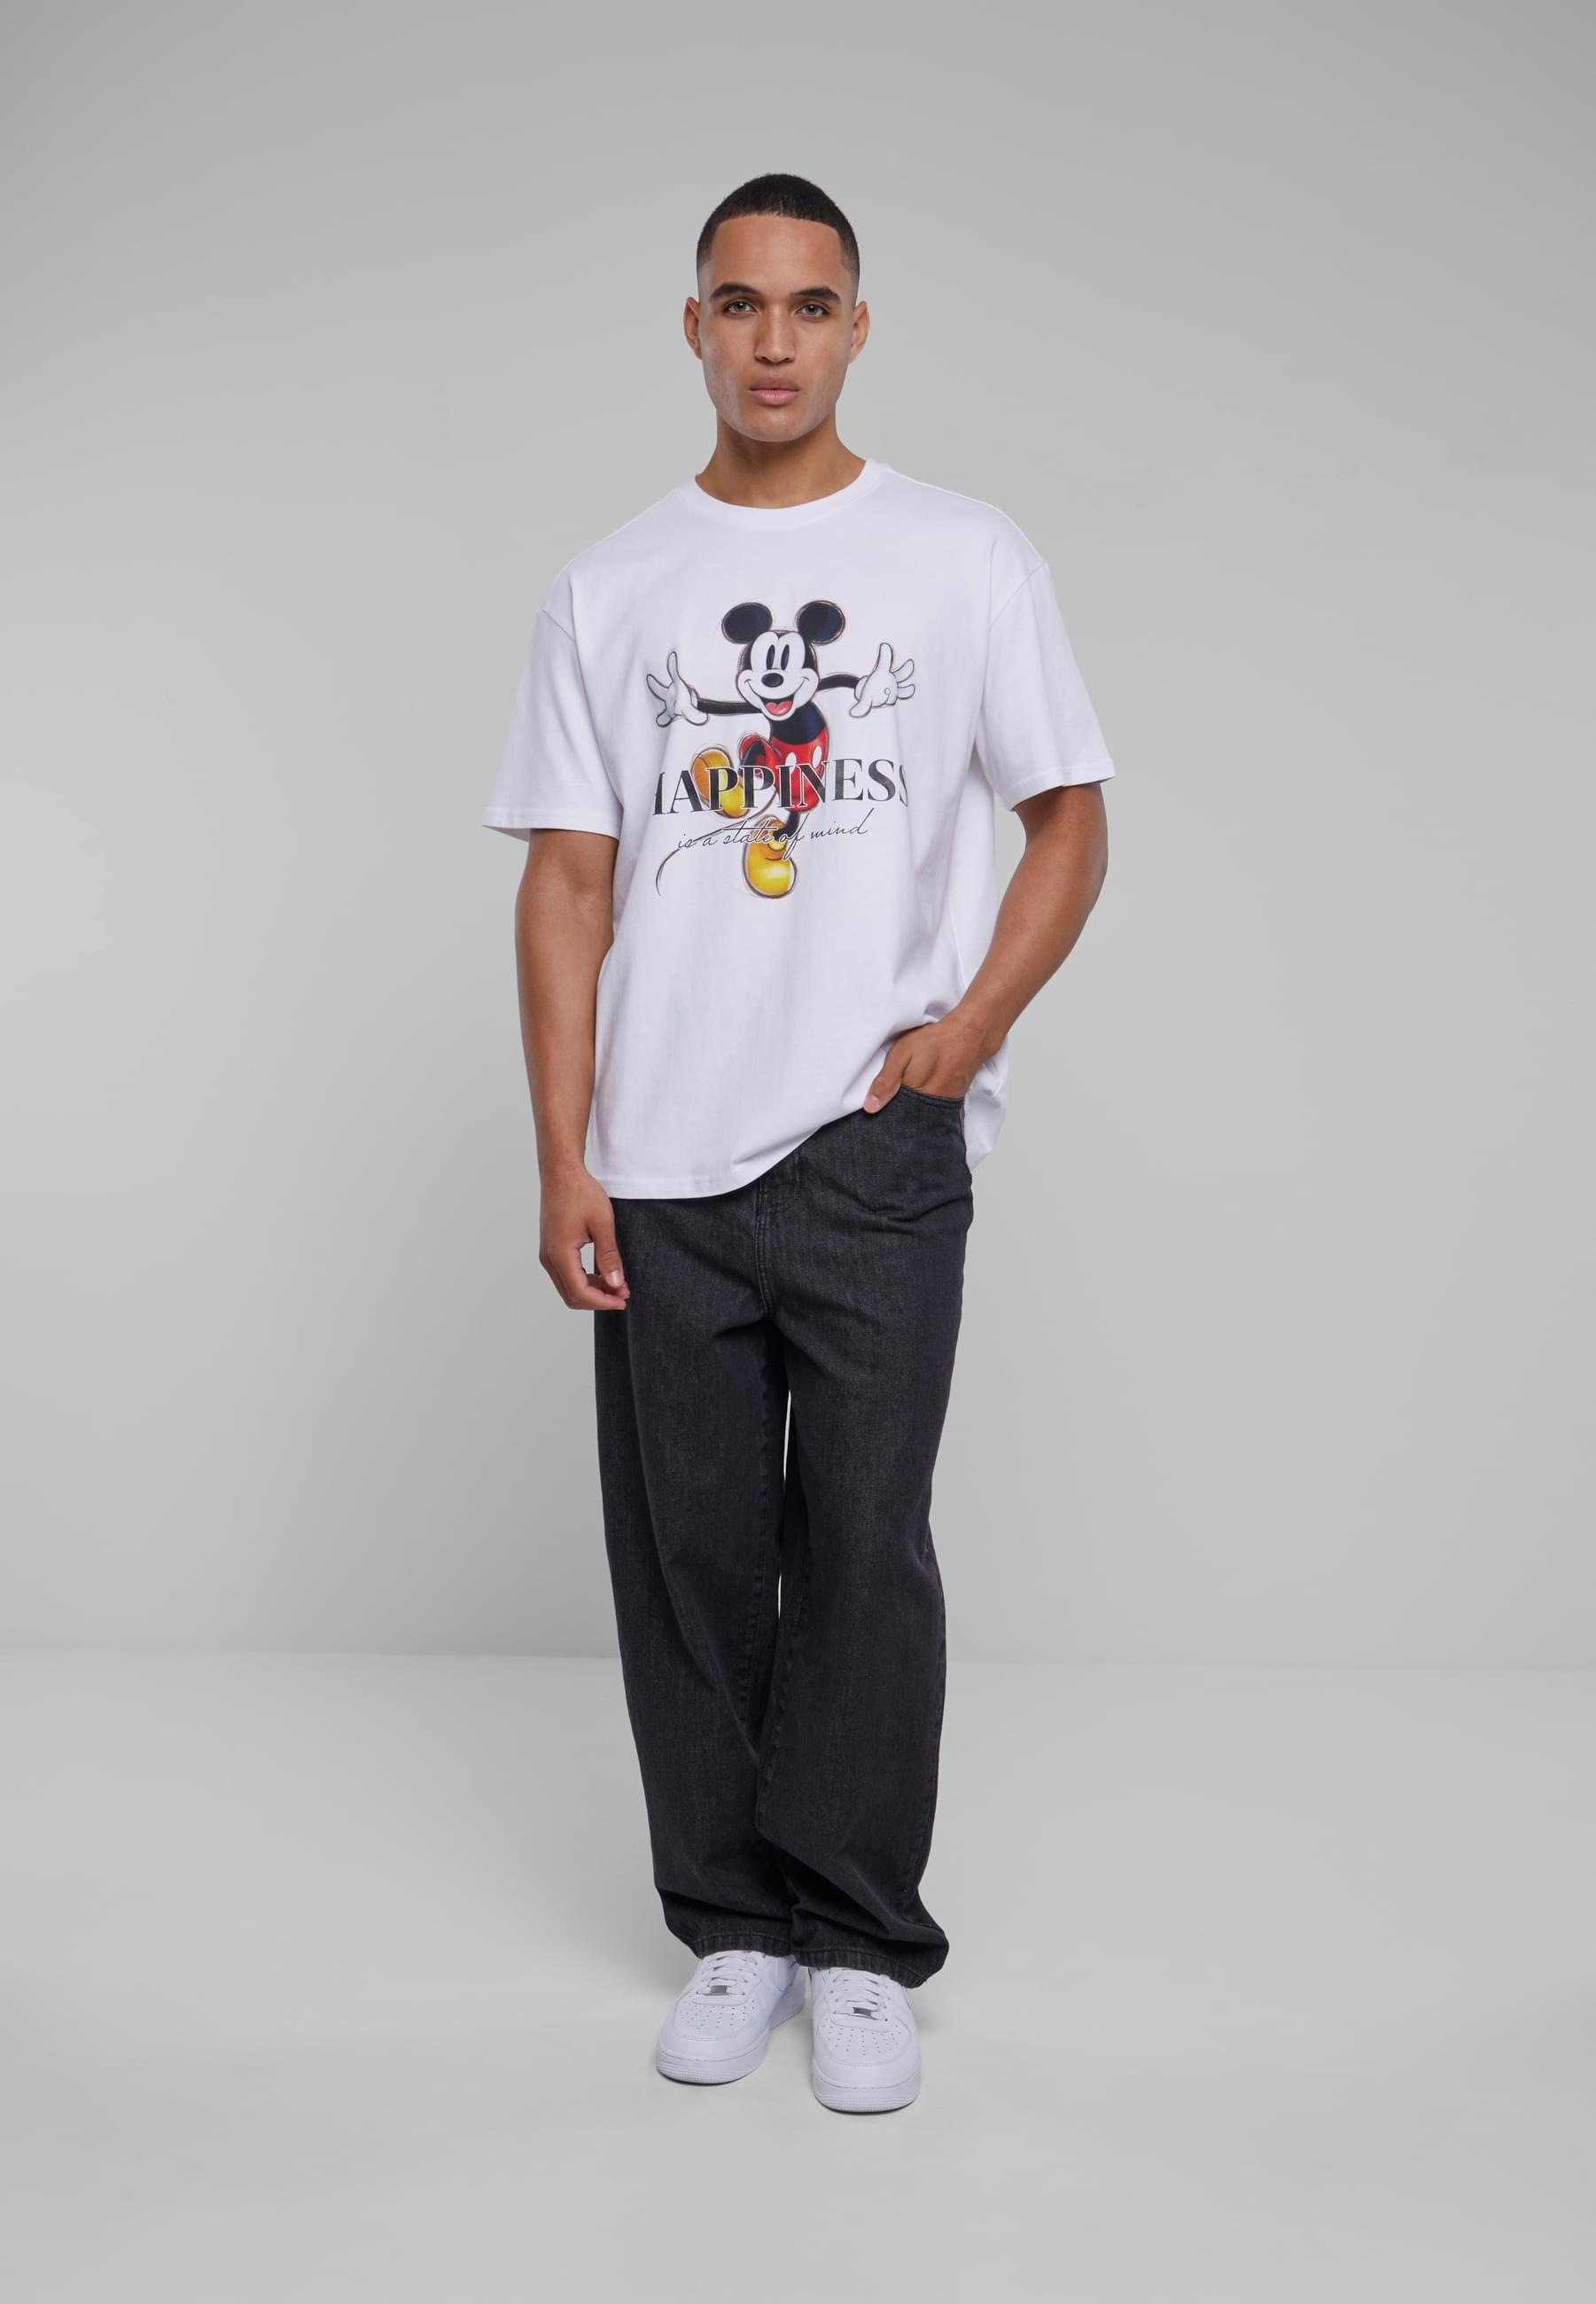 Upscale by T-Shirt Mickey kaufen Mister Oversize Happiness 100 | tlg.) Tee«, Disney Tee »Unisex BAUR online (1